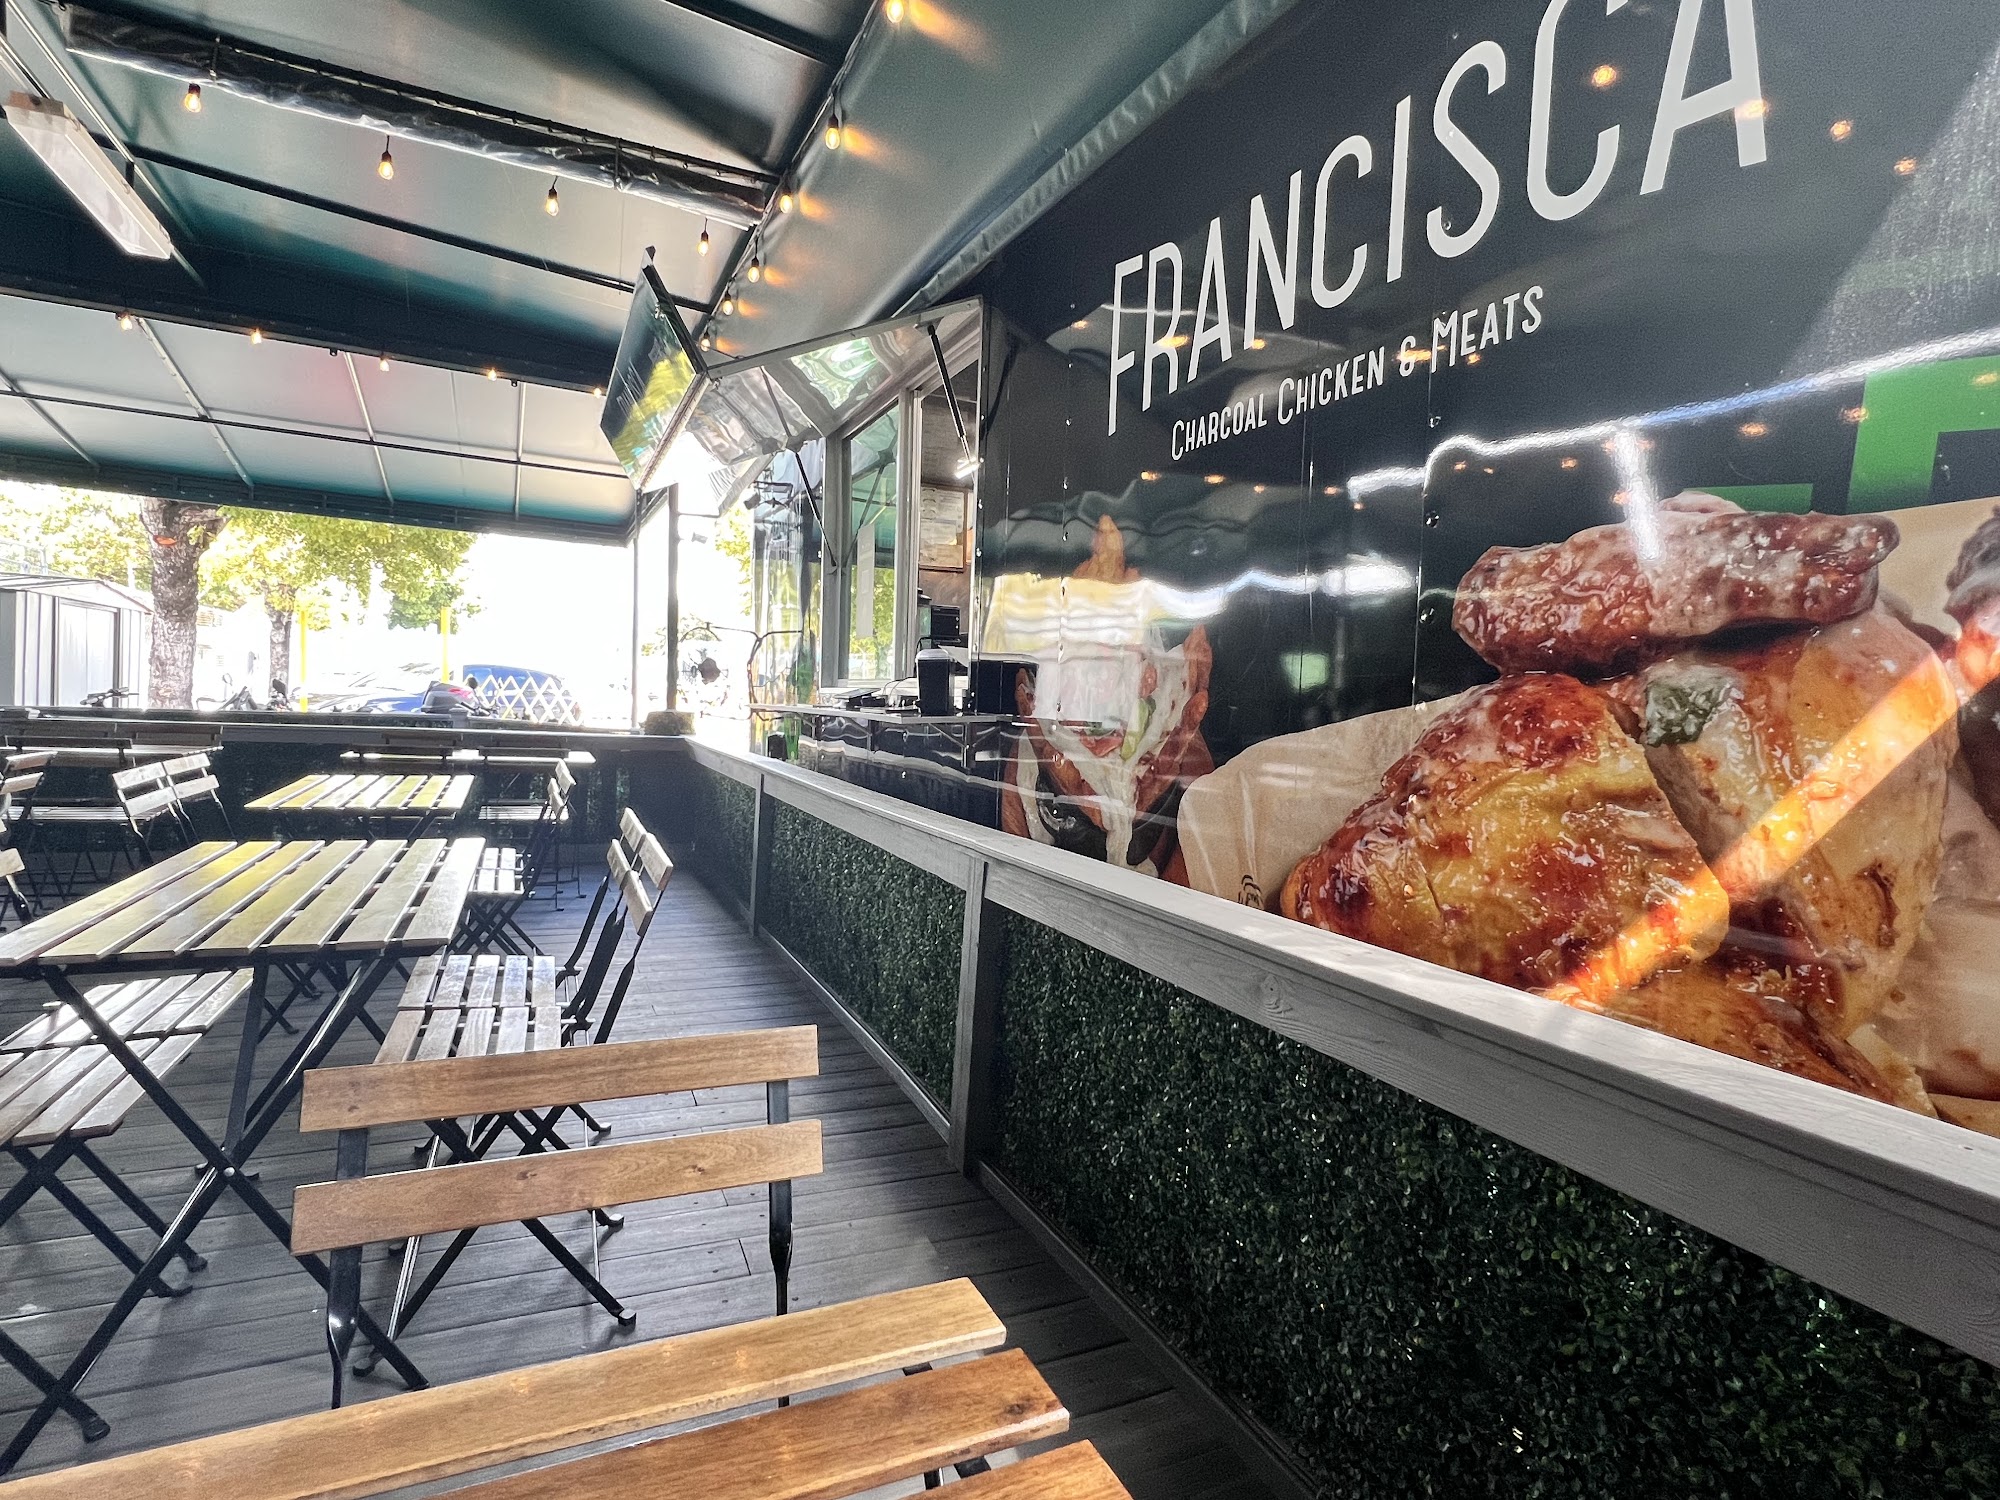 Francisca Charcoal Chicken & Meats - Wynwood (Food Truck)